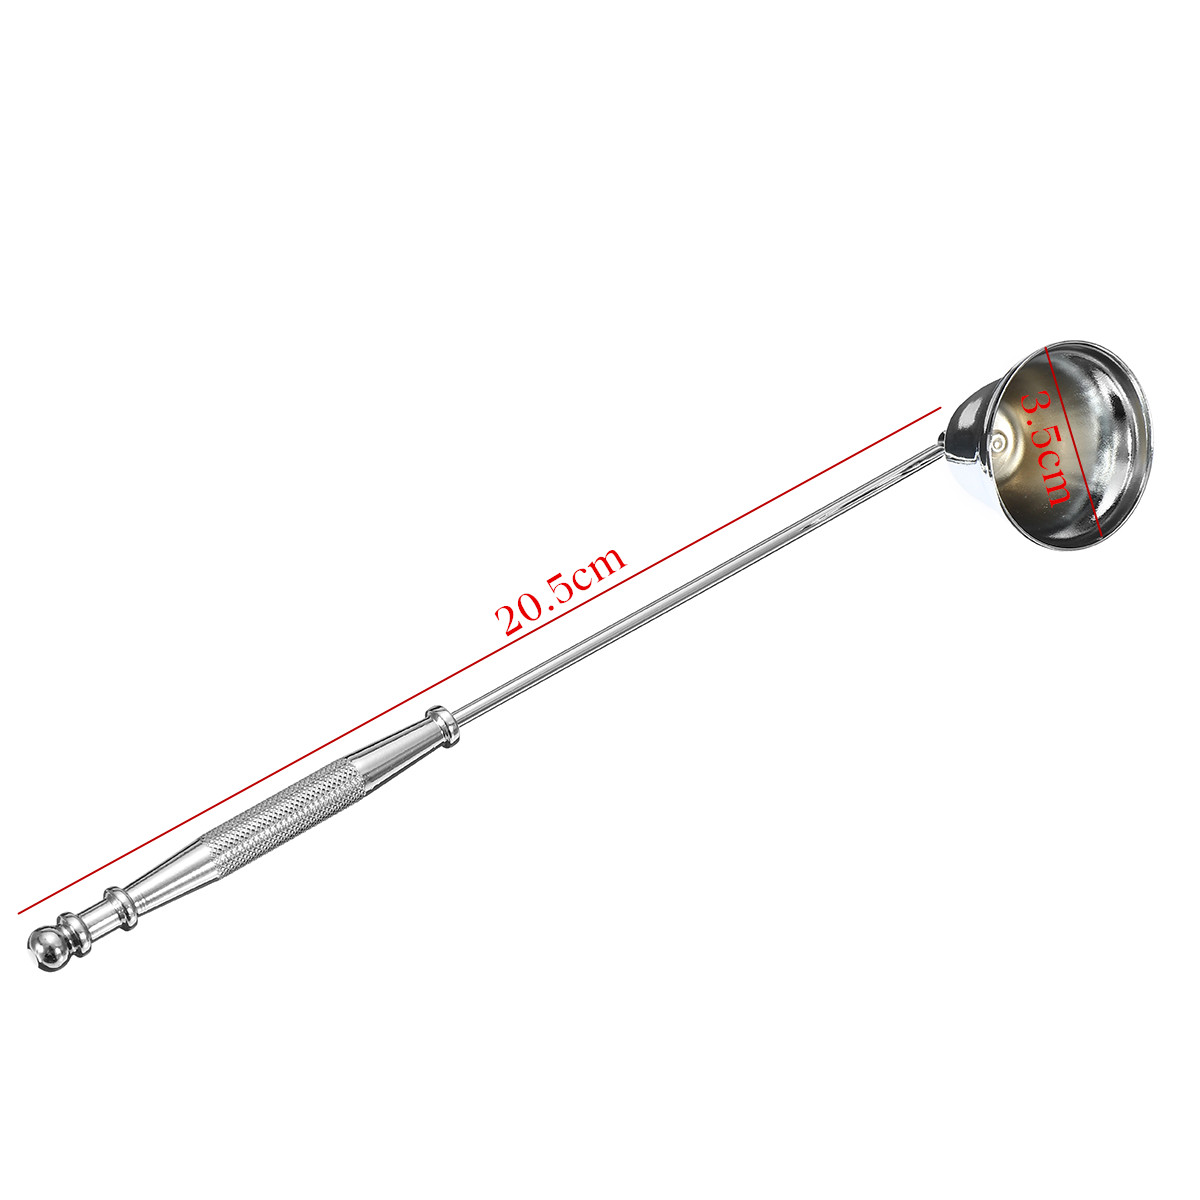 Stainless-Steel-Candle-Snuffer-Silver-Long-Extinguisher-for-Tea-Light-Candle-Tool-1252840-2